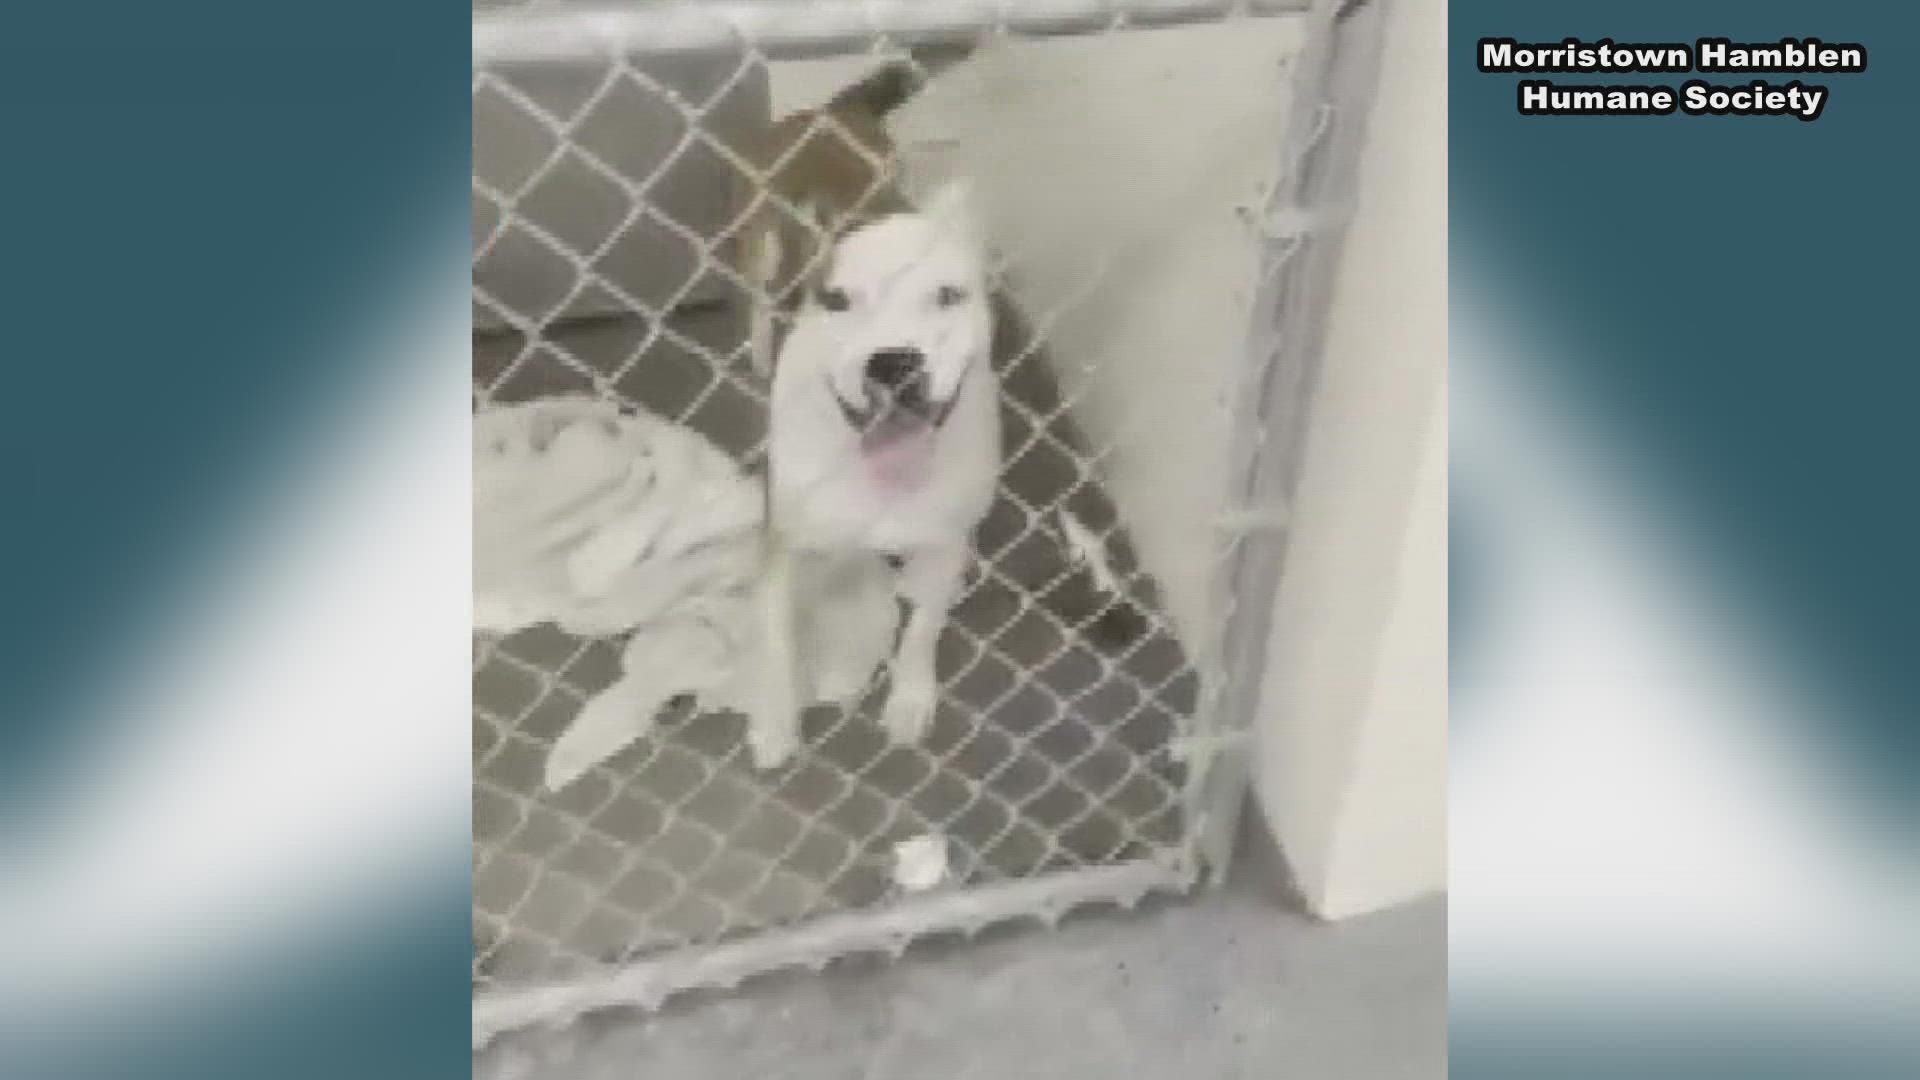 Young-Williams Animal Center and the Morristown-Hamblen Humane Society said they are having to find more room as their animal shelters fill up.